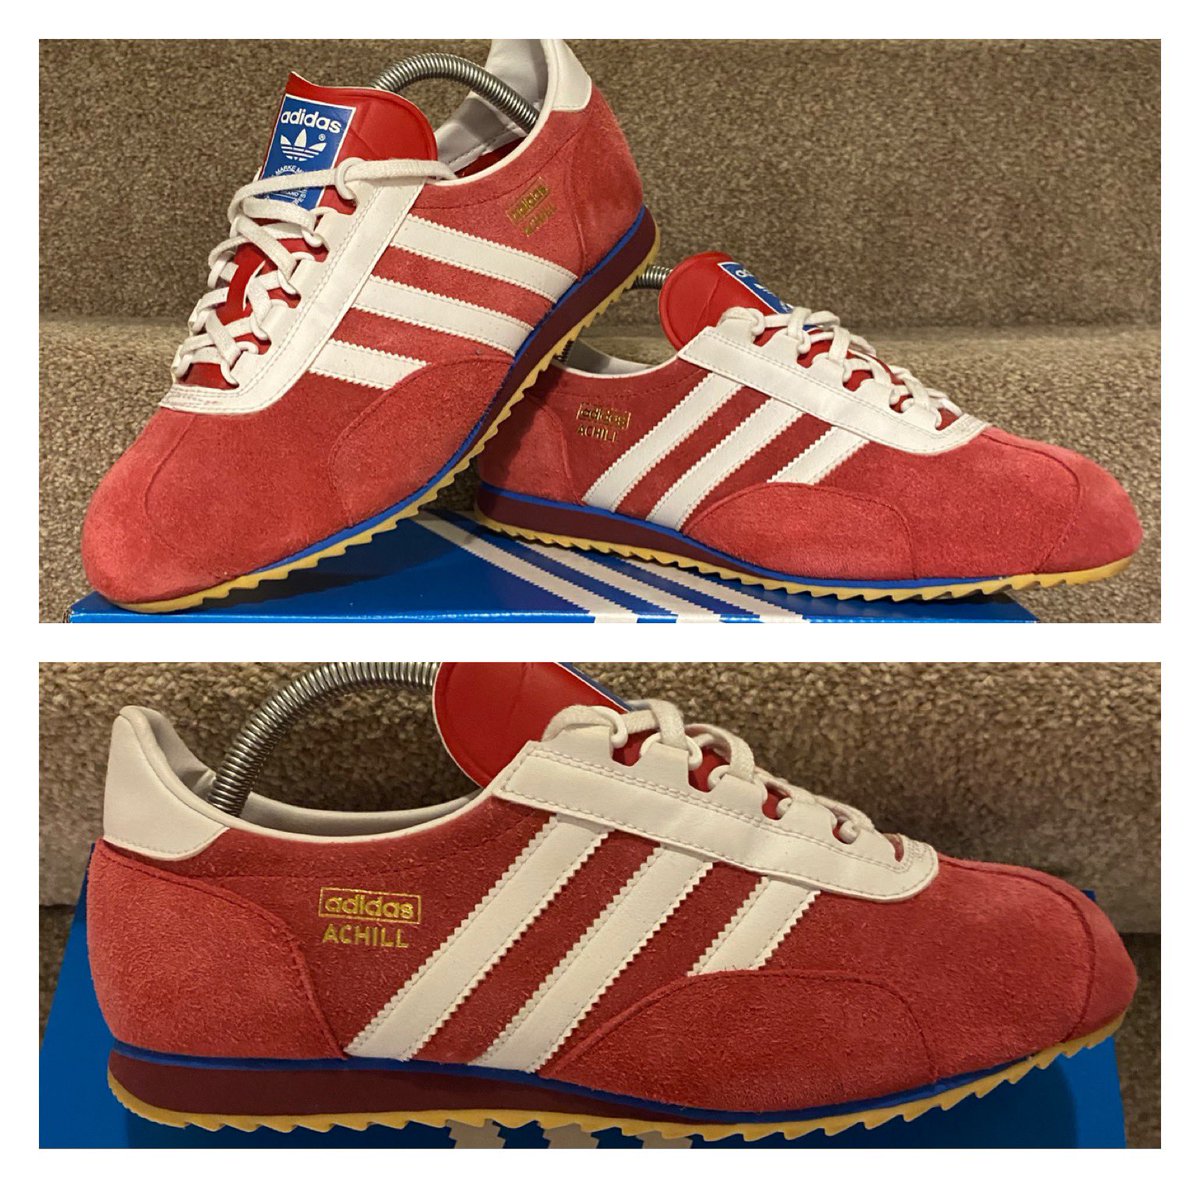 Man Savings on Twitter: "Adidas Achill ....... Beauties👌 personally would love to see a reissue of these🤞 📸 @adi_jeans 👍 https://t.co/4f093XBQid" / Twitter